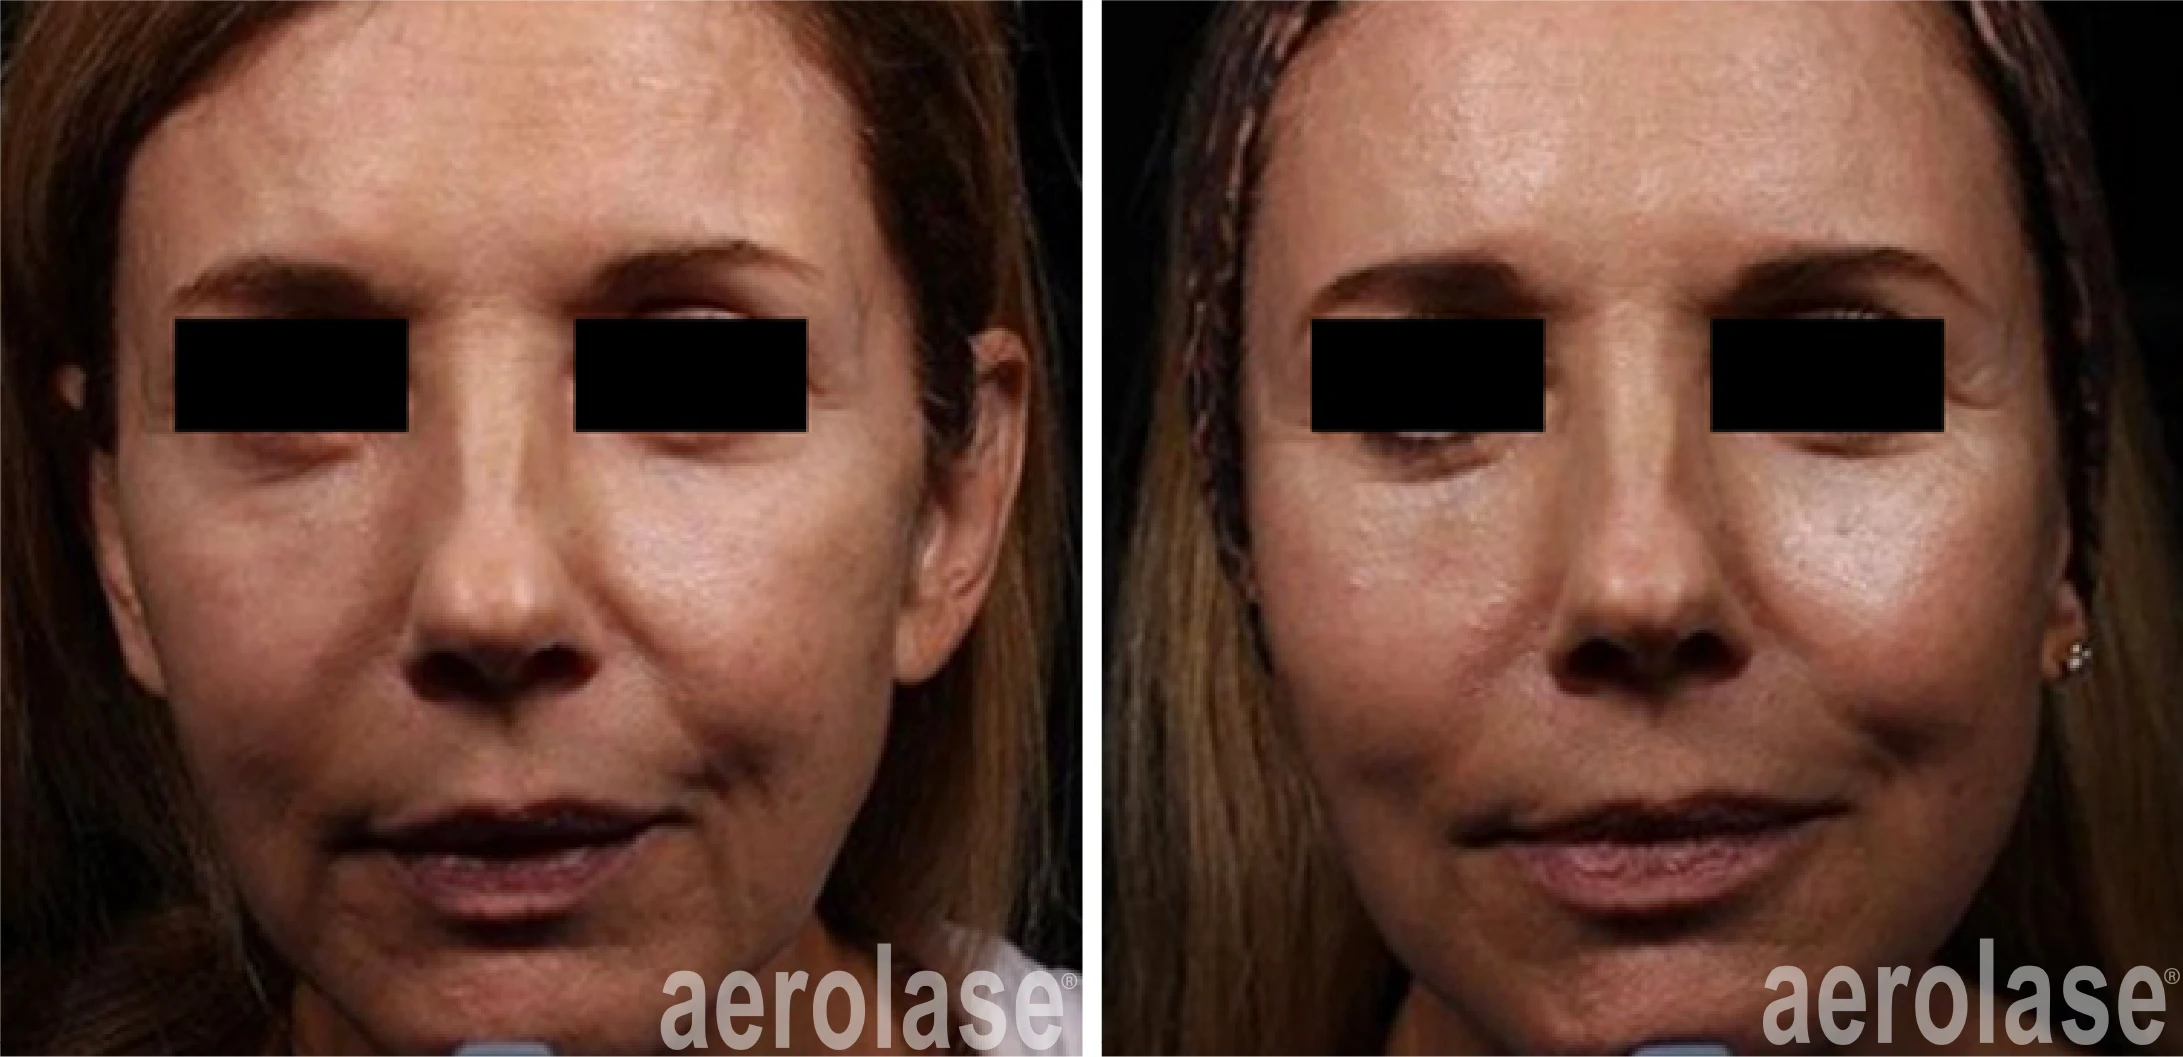 aerolase-neoskin-skin-rejuvenation-after-2-treatments-combined-with-threads-and-filler-one-aesthetics